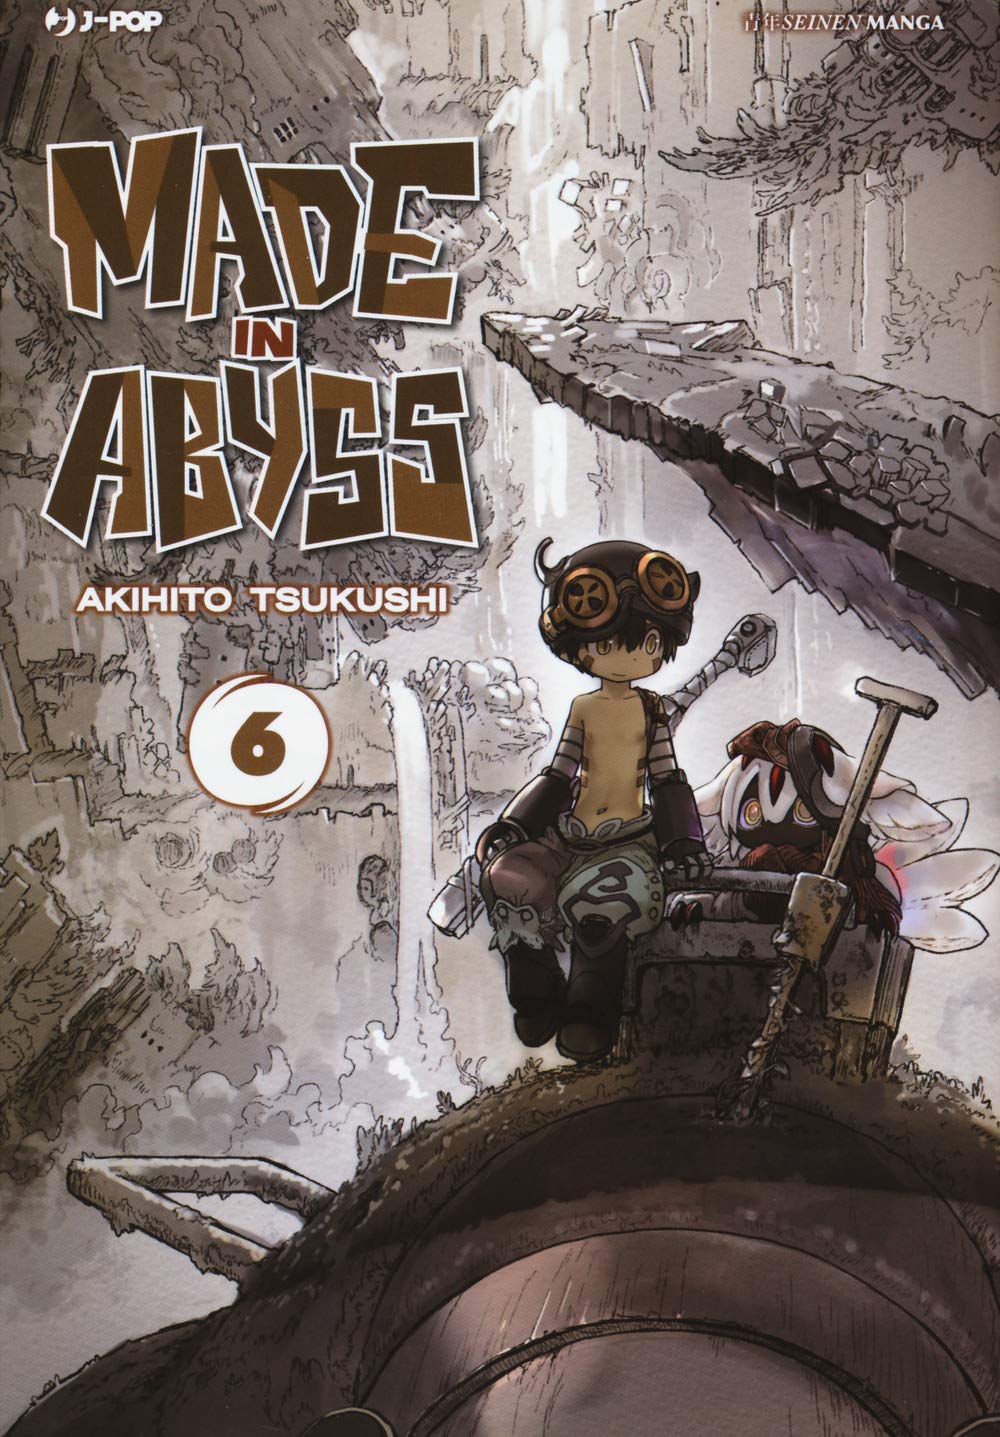 Made in abyss (Vol. 06)